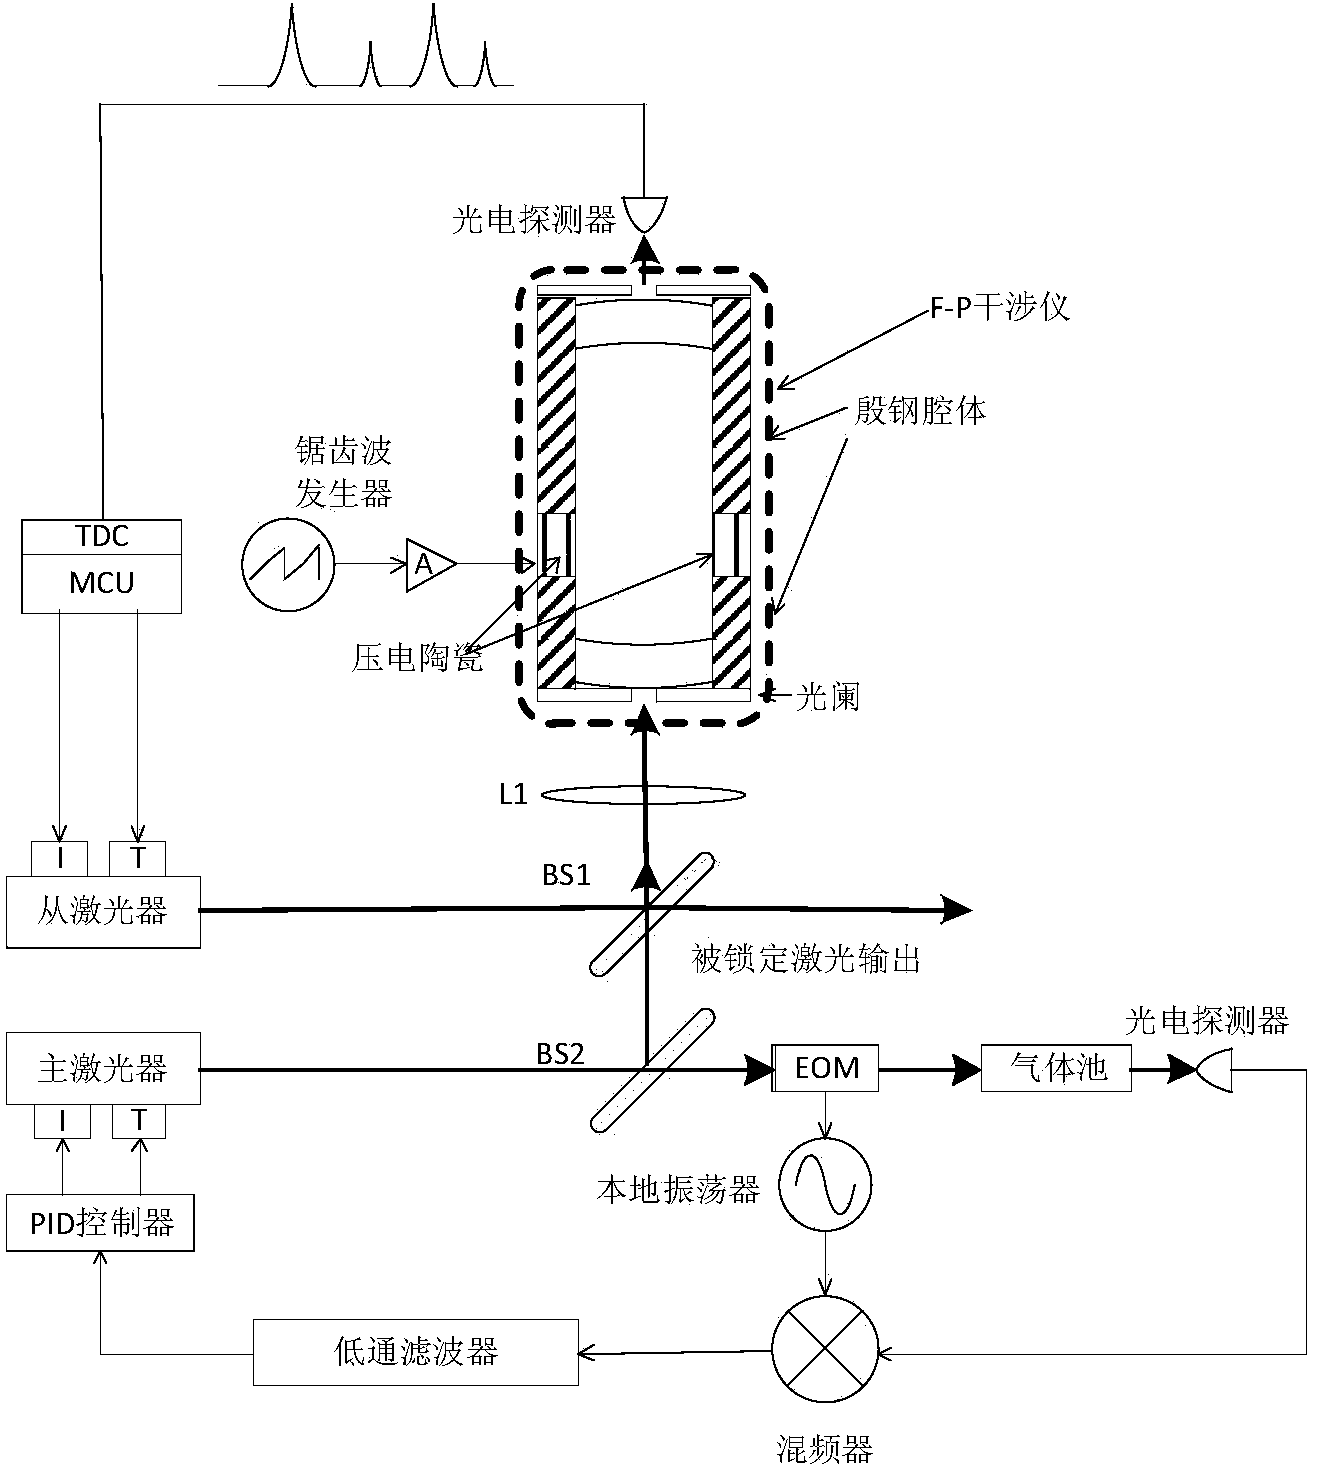 Method for achieving laser frequency-offset-lock through scanning confocal cavity F-P interferometer